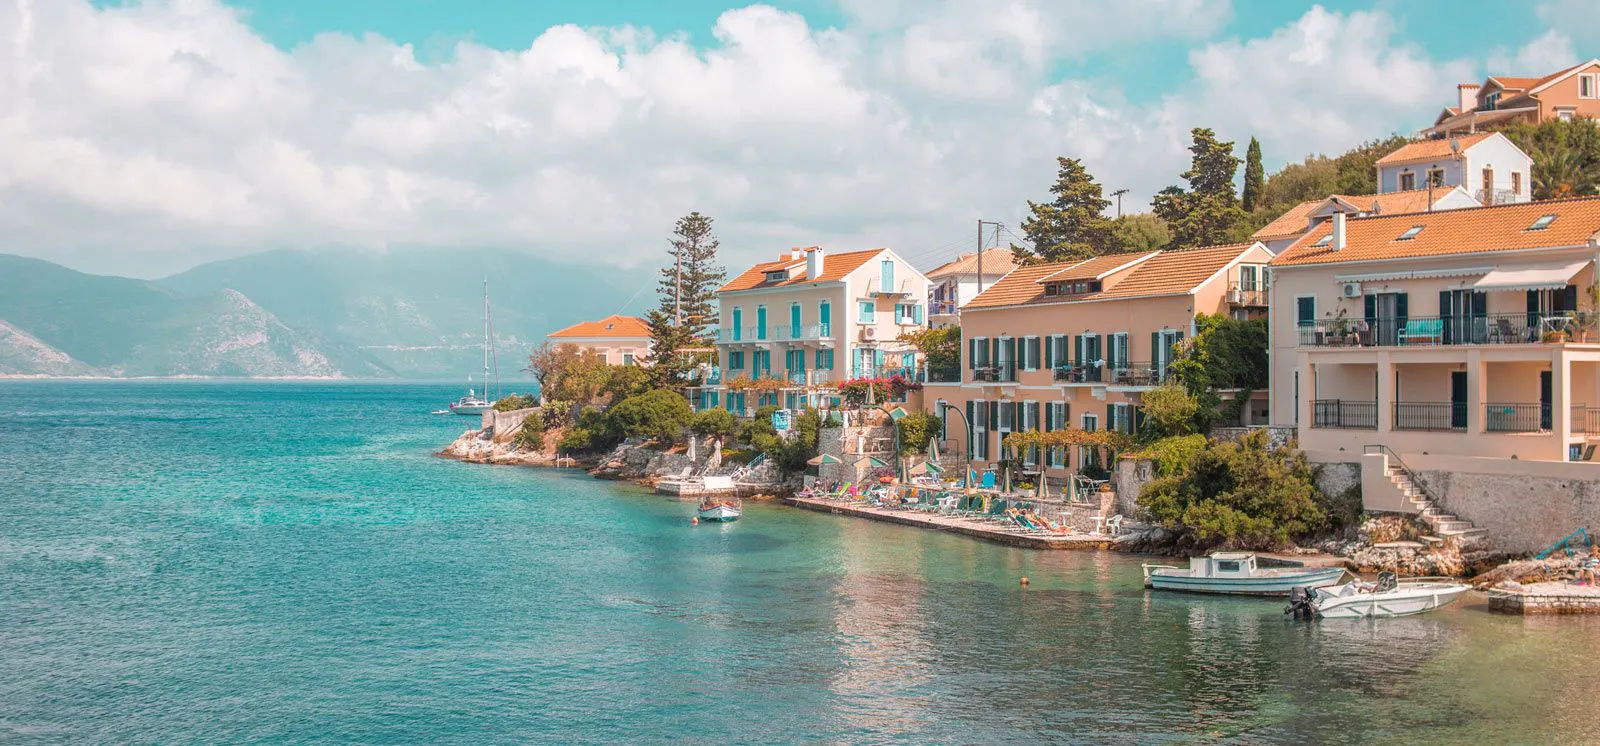 Fiskado village in Kefalonia with pastel-colored buildings by the sea